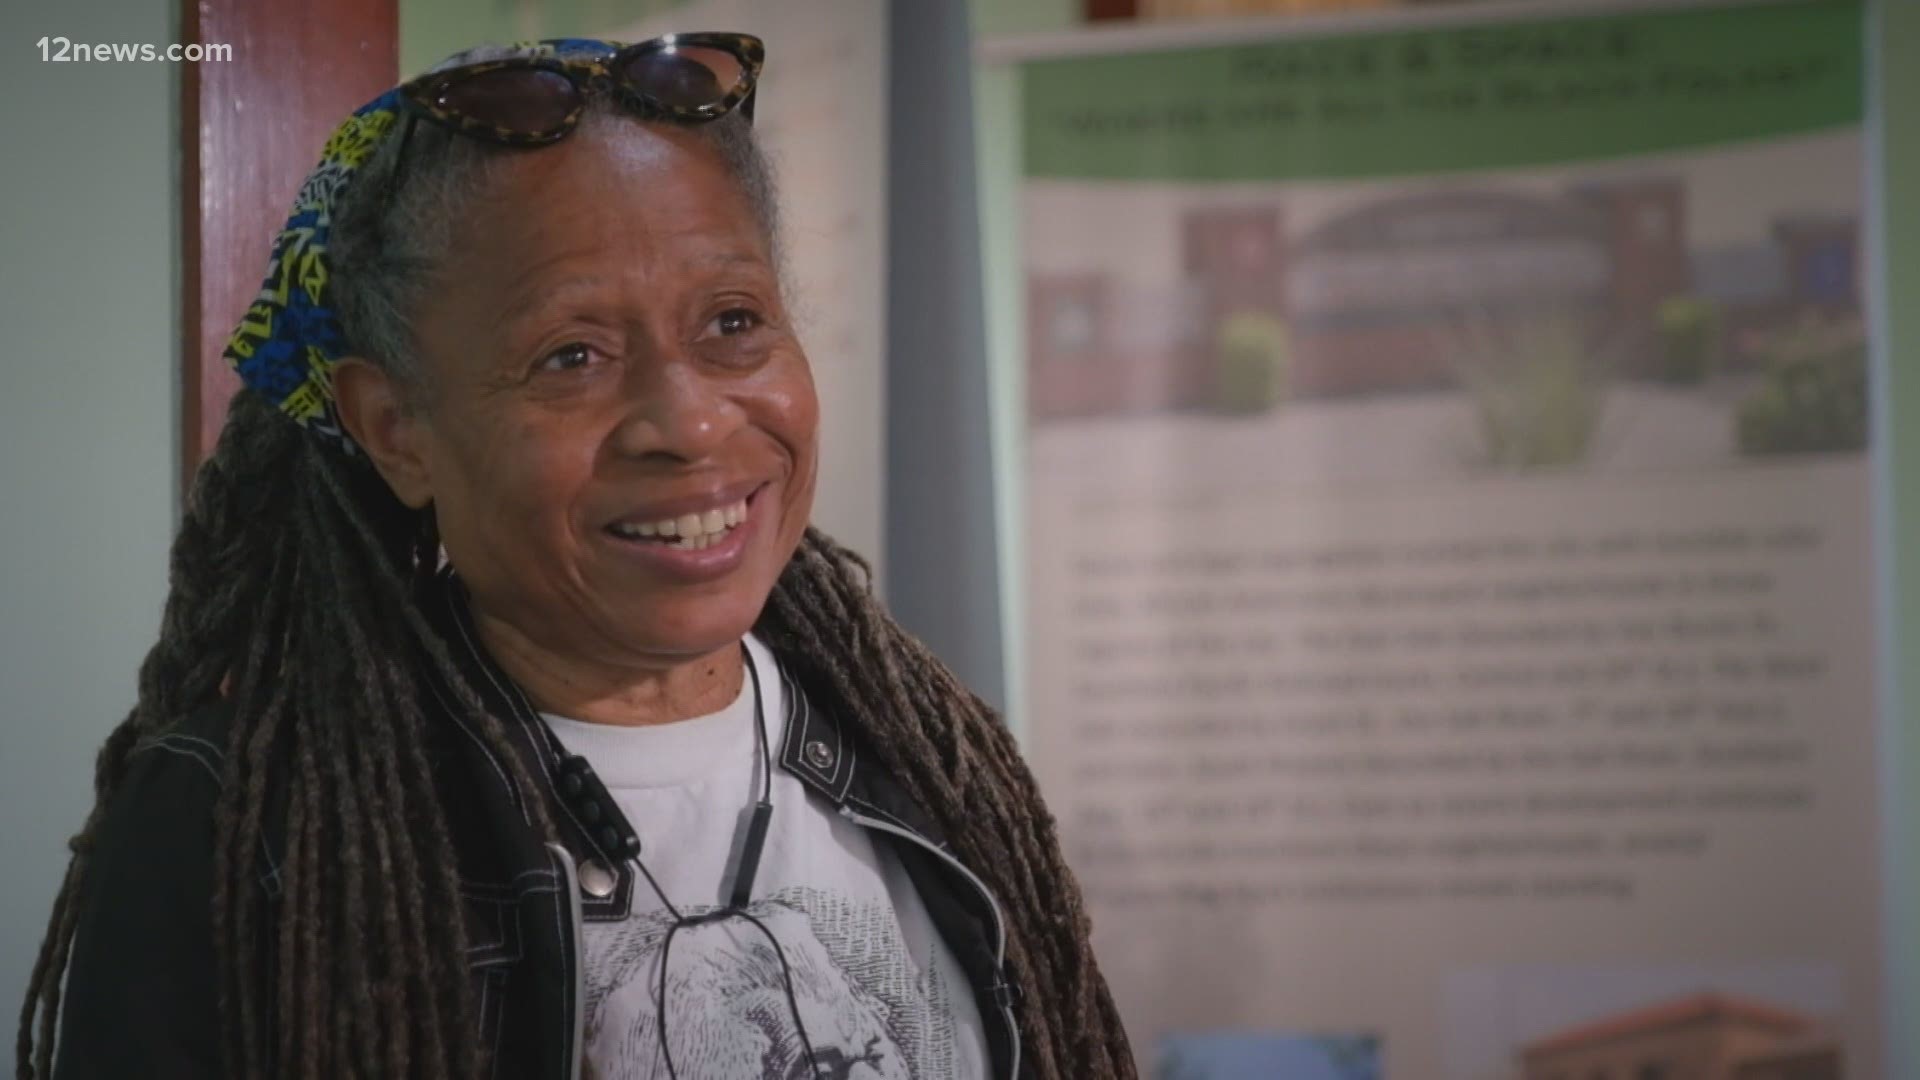 Clottee Hammons wears many hats as a mother, artist, writer and activist. She has also made it her mission to educate others on Black history and civil rights issues